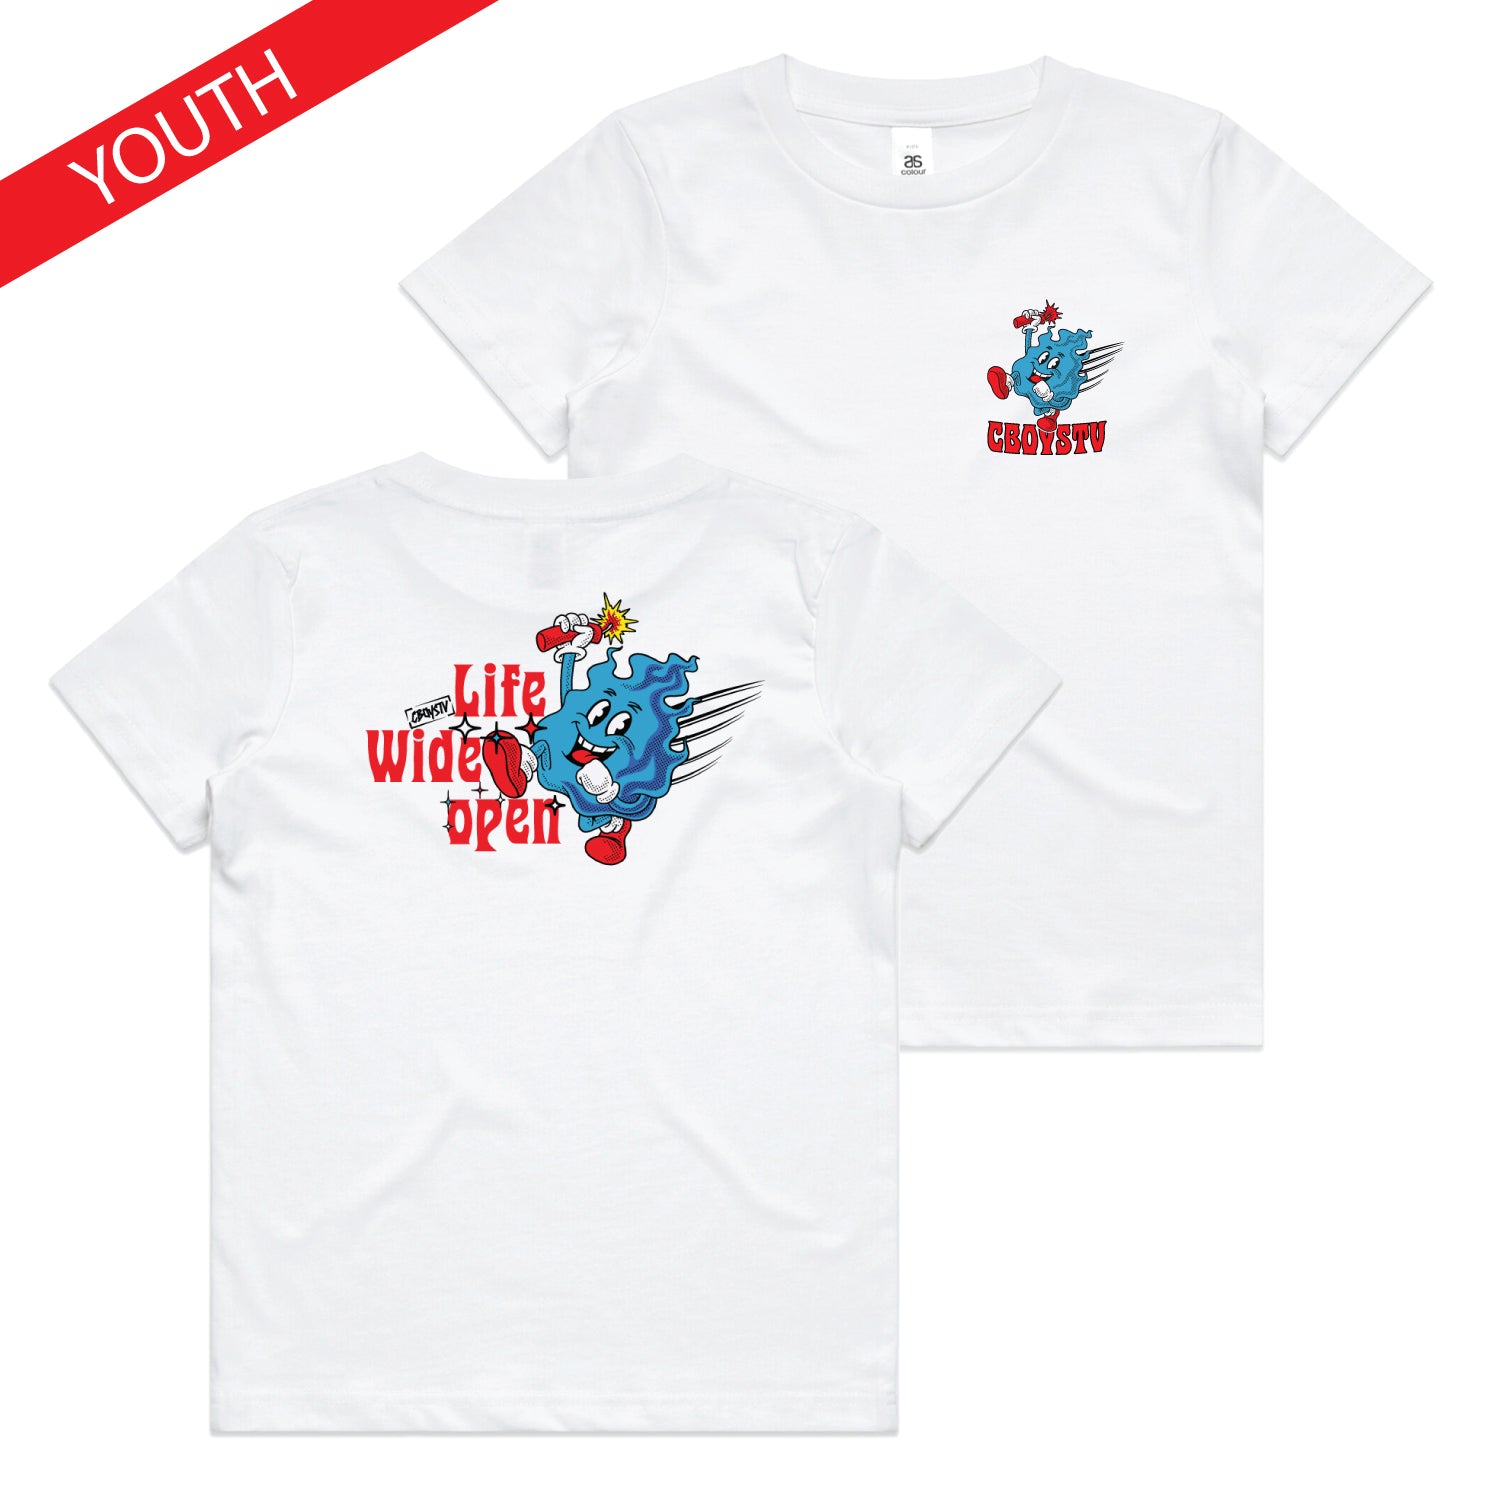 YOUTH - World Industries T-shirt